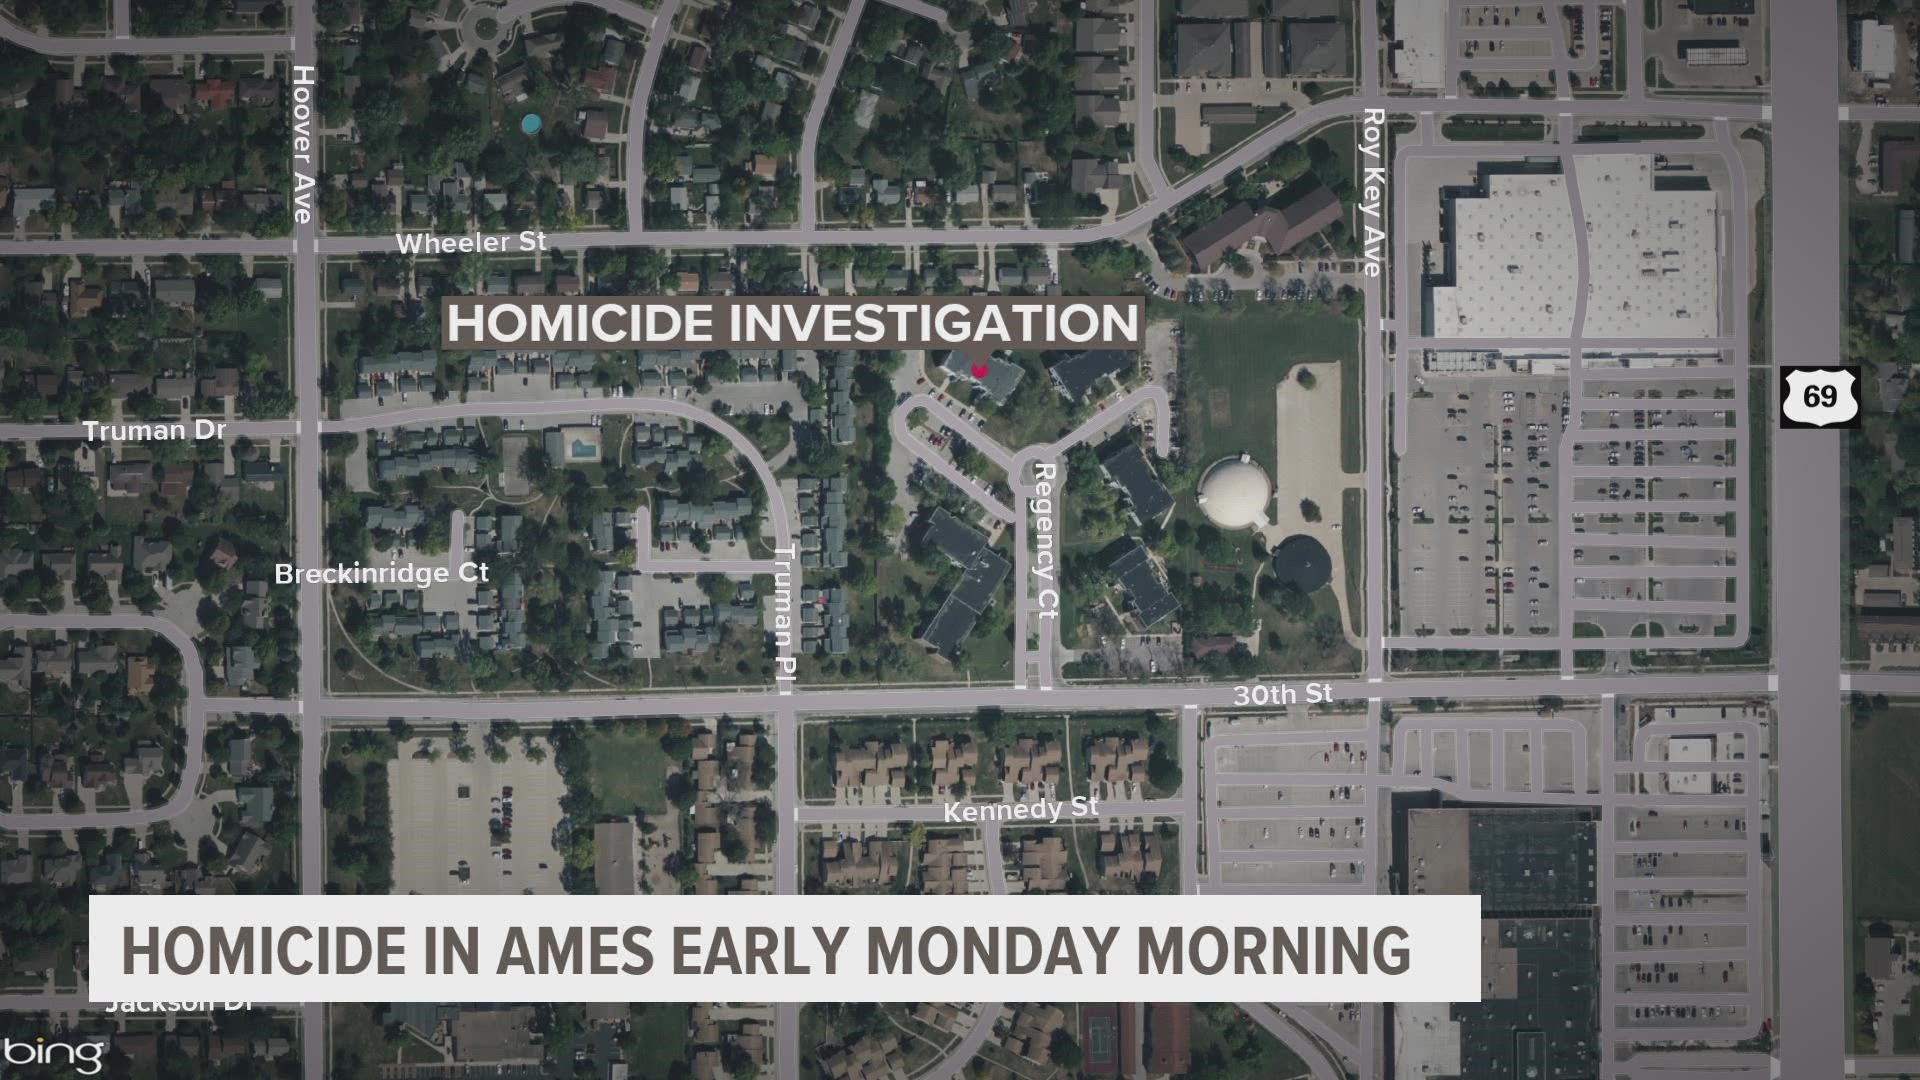 The Ames Police Department said they found a man with multiple gunshot wounds.